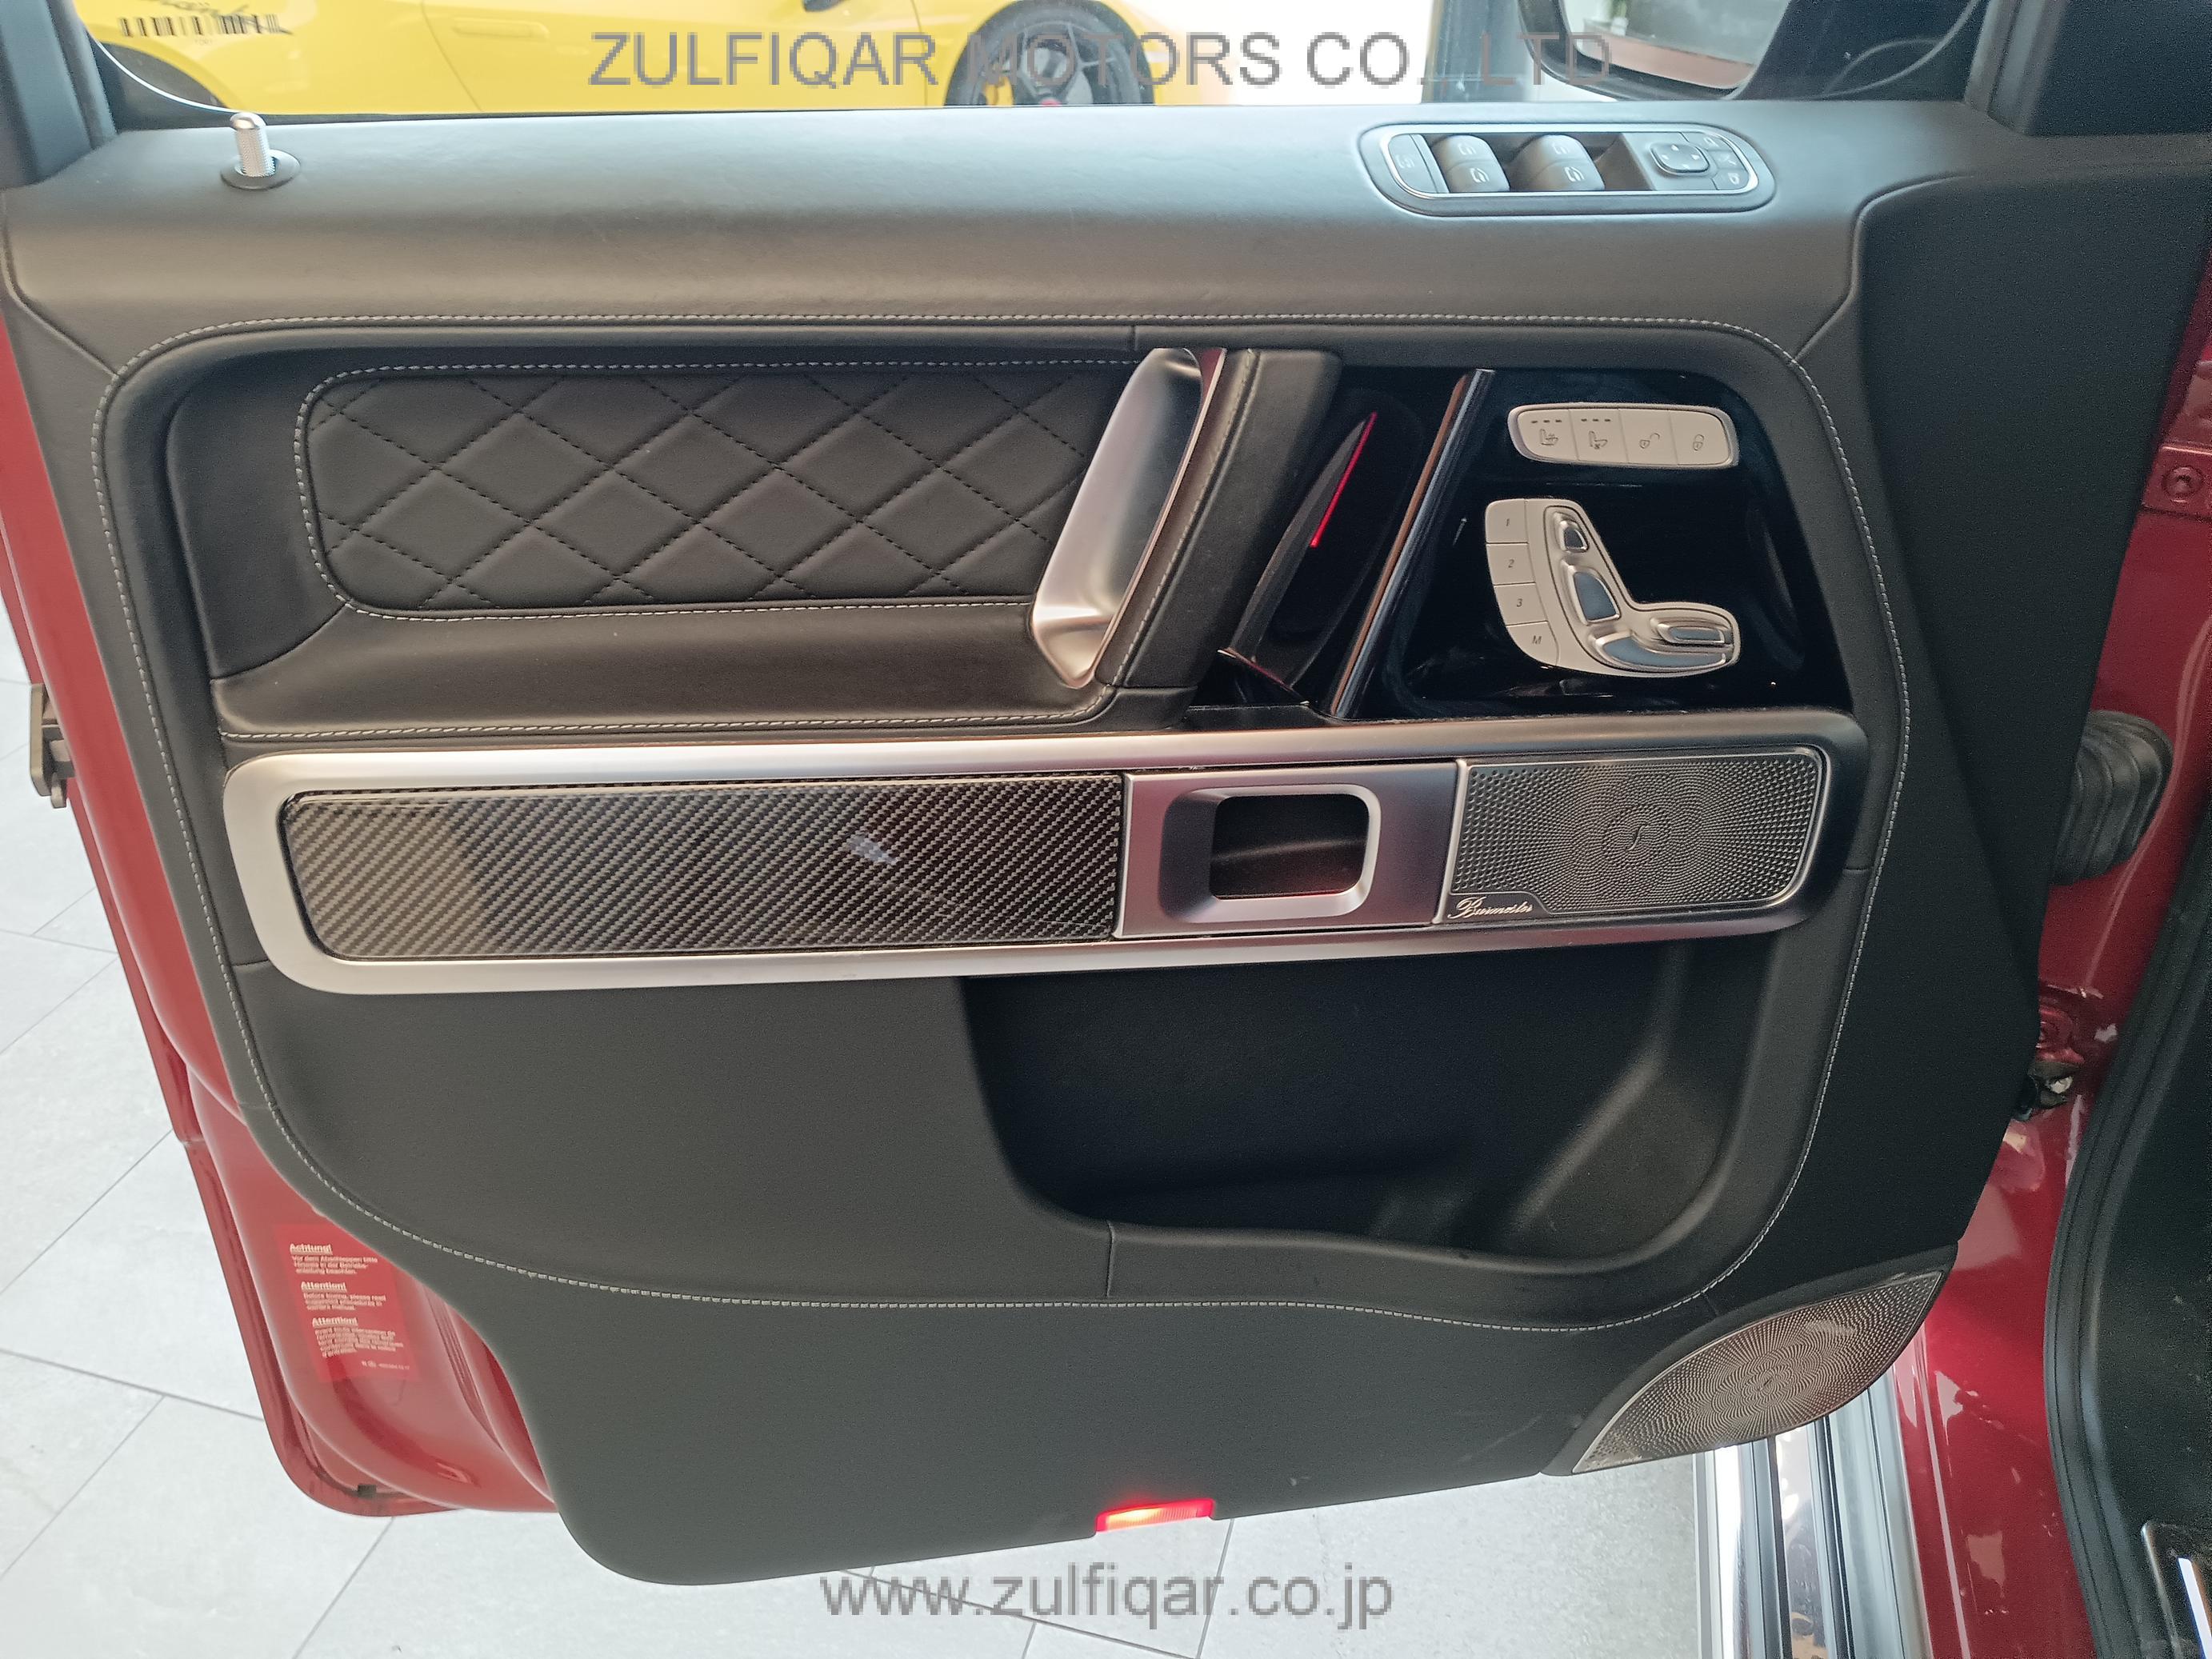 MERCEDES AMG G CLASS 2019 Image 55